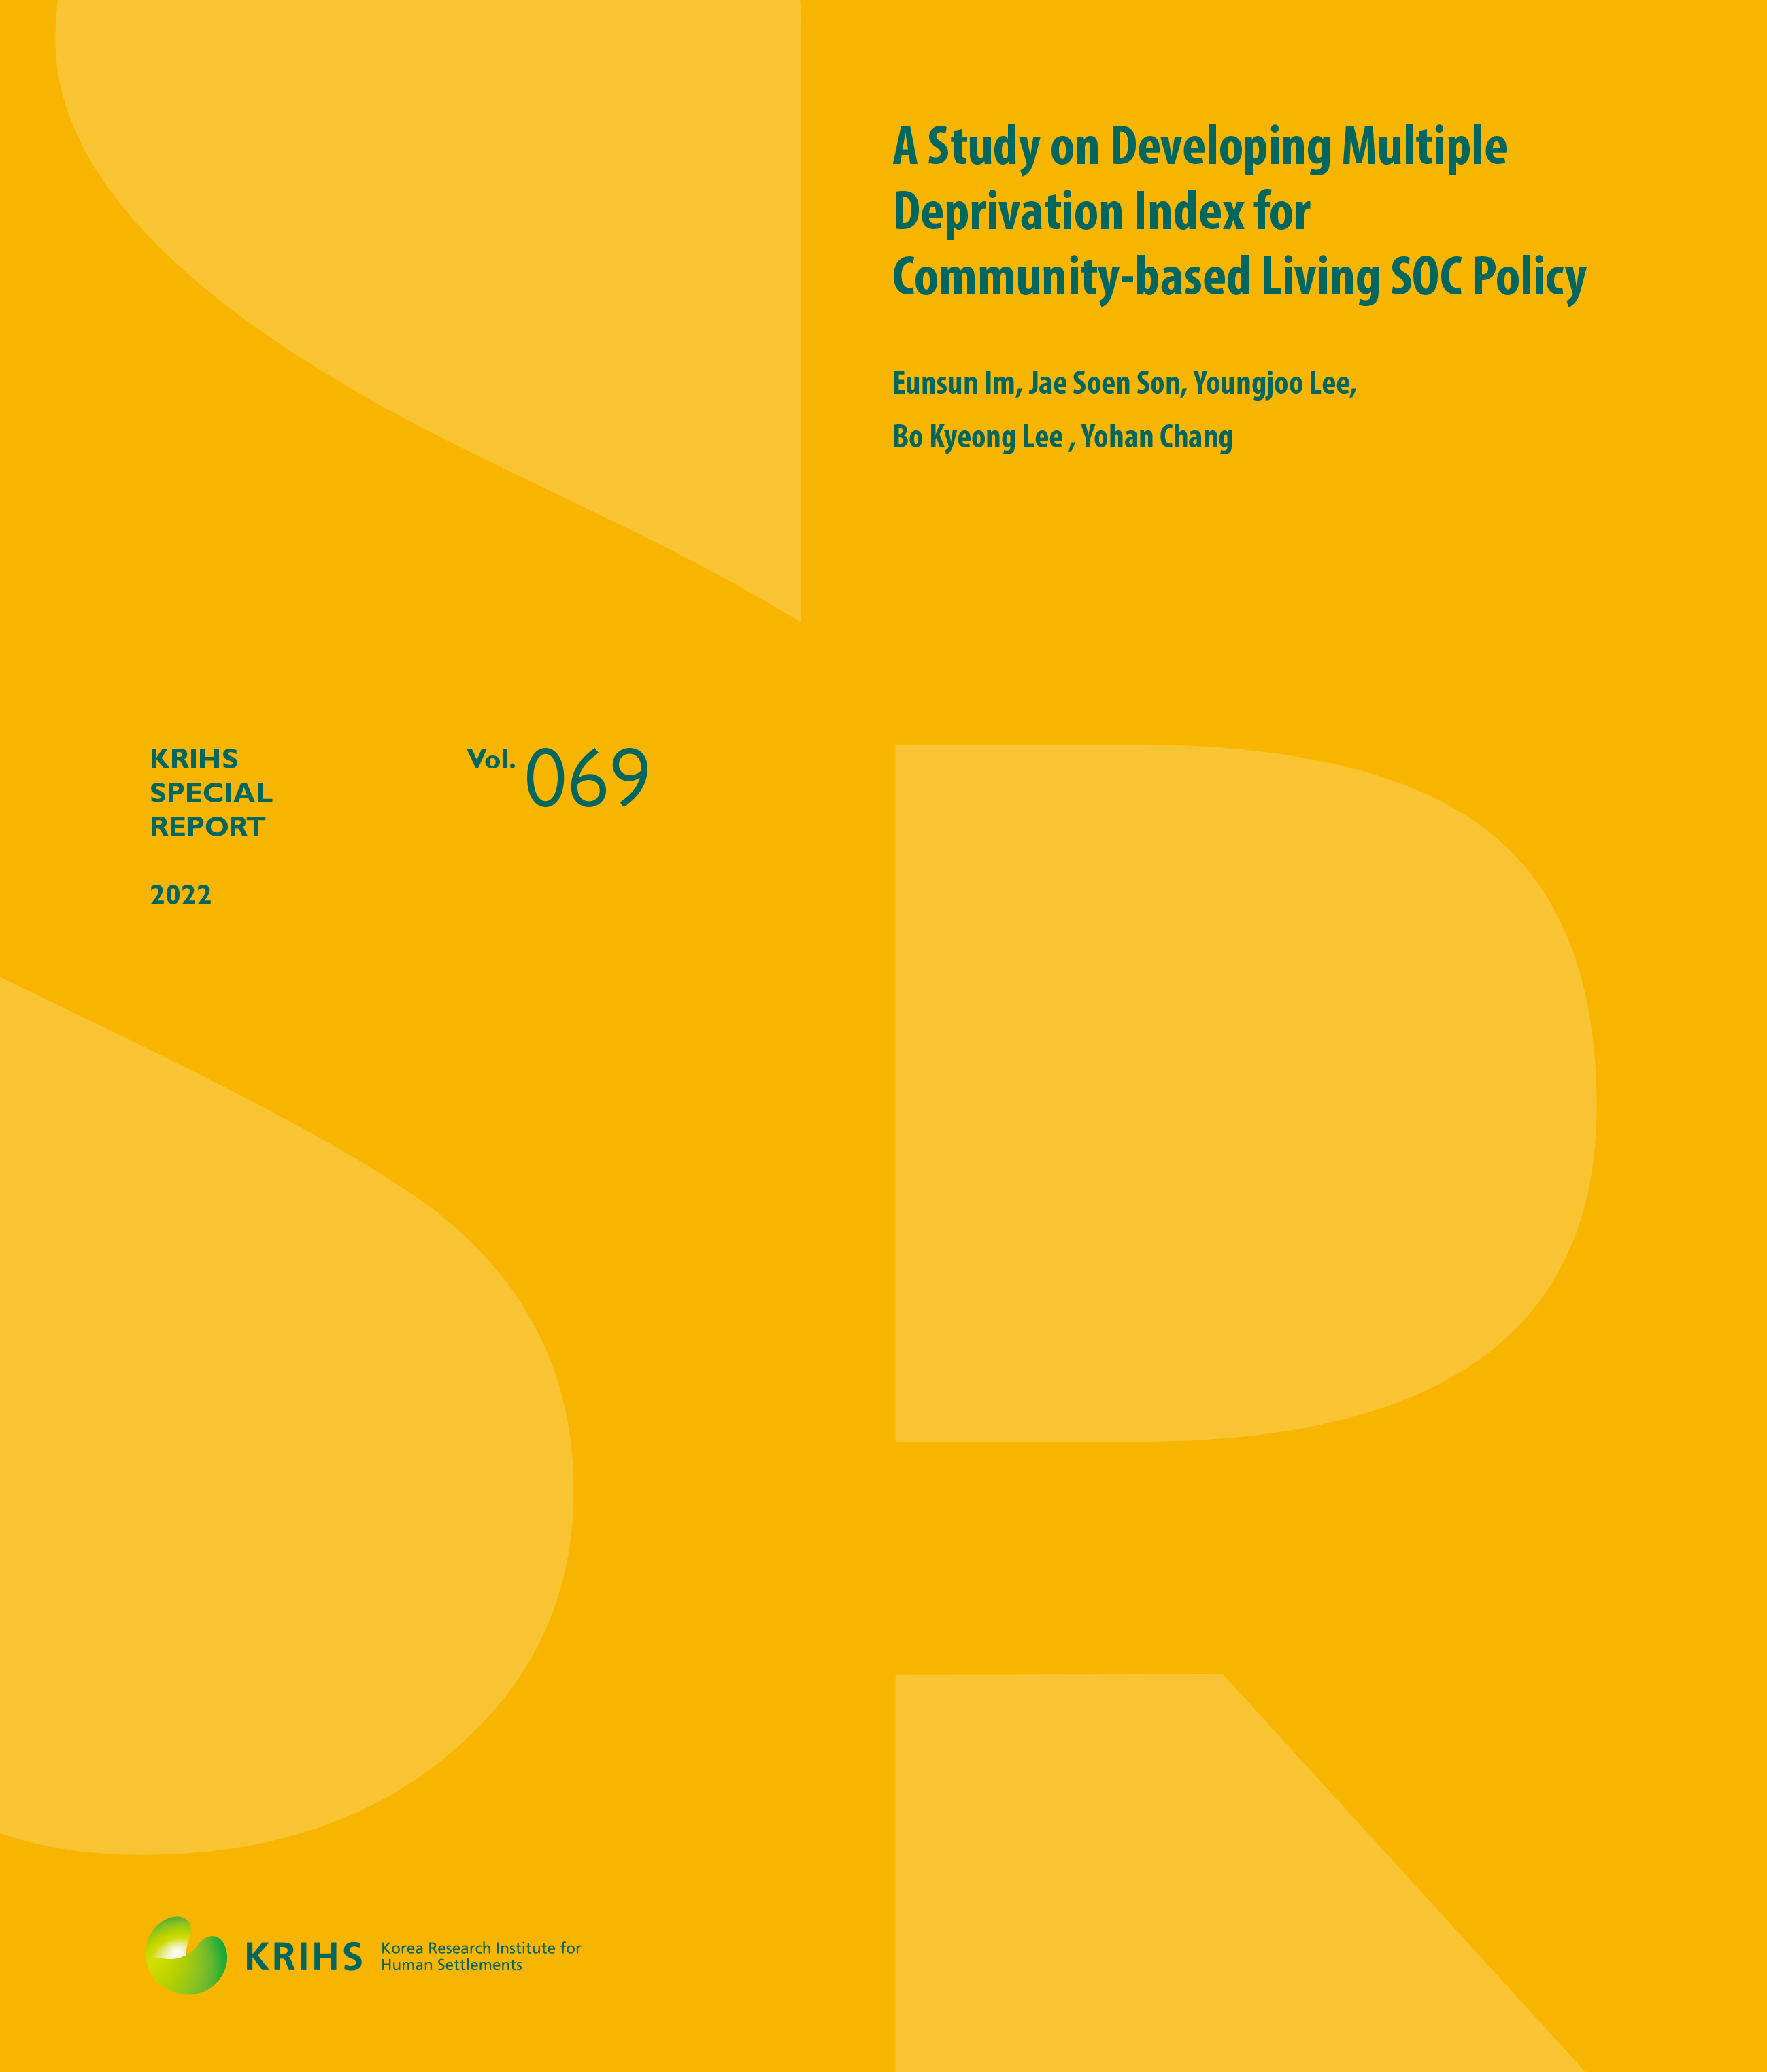 Special Report Vol. 69 (2022)

A Study on Developing Multiple Deprivation Index for Community-based Living SOC Policy